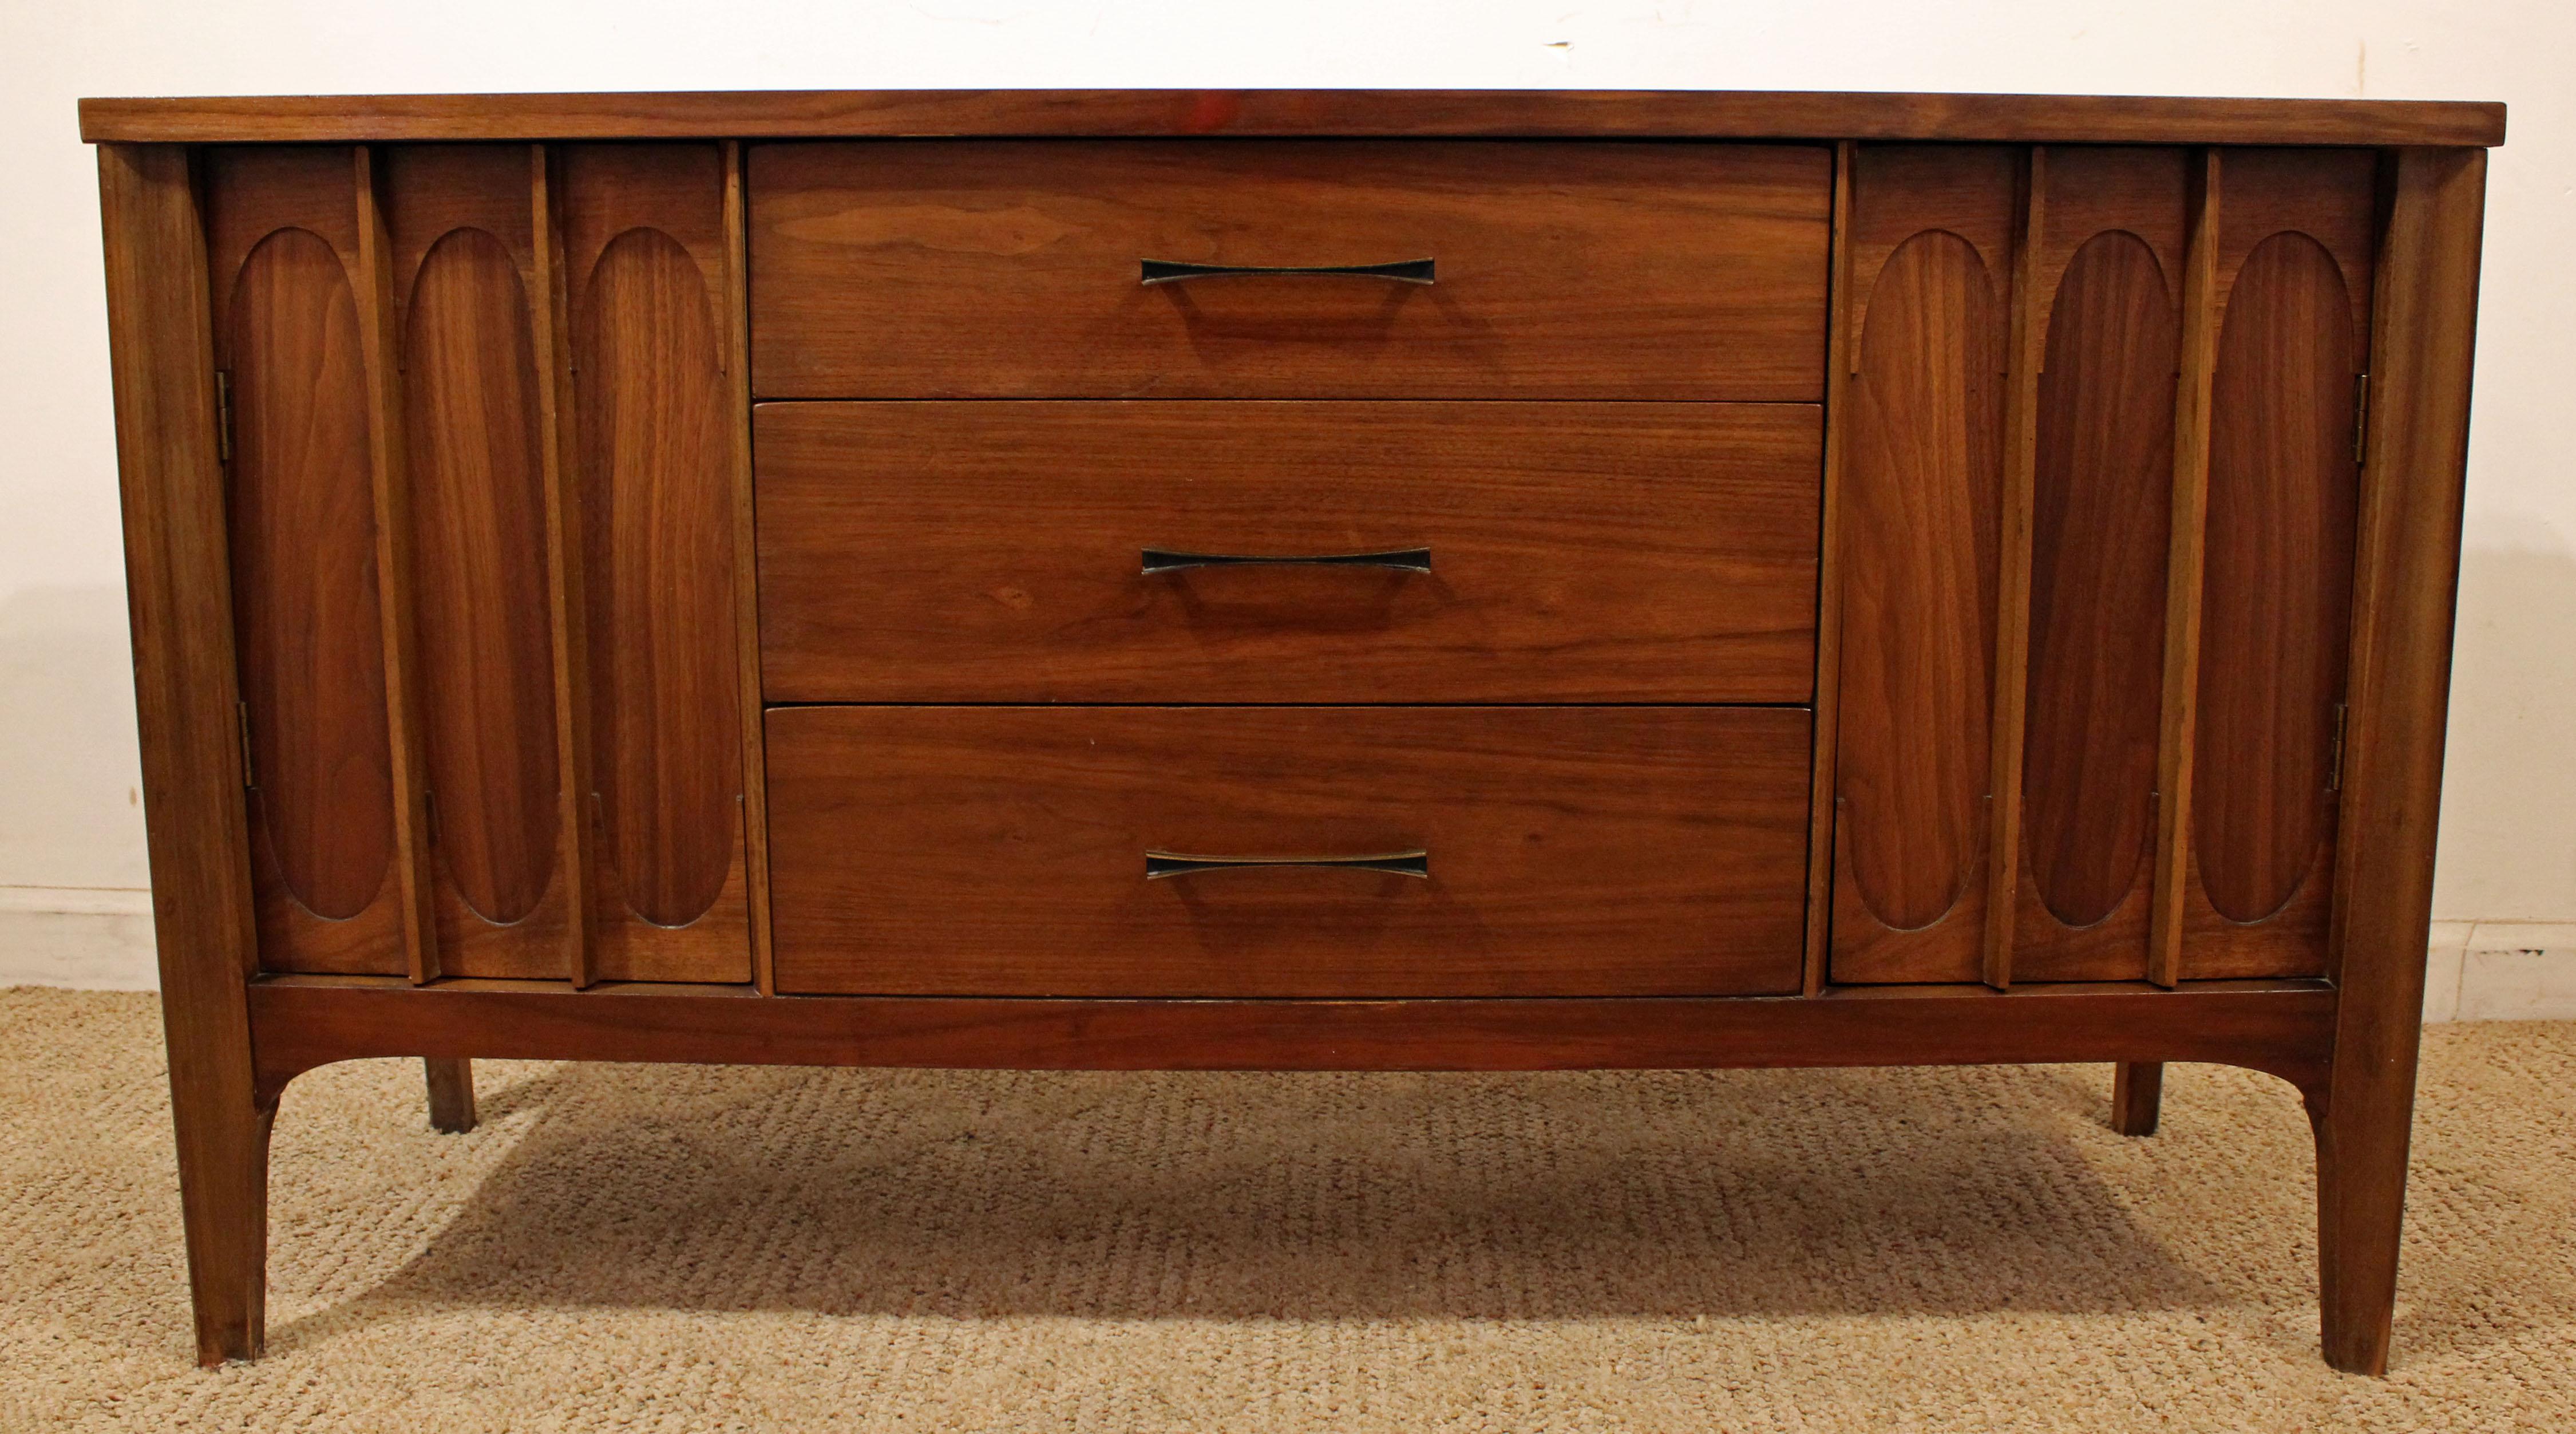 Offered is a Mid-Century Modern credenza. The piece has a nice shape and modern lines. It is made of walnut, featuring two doors with inside shelving and three center drawers. The top has been refinished. It is not signed. 

Dimensions:
47.25